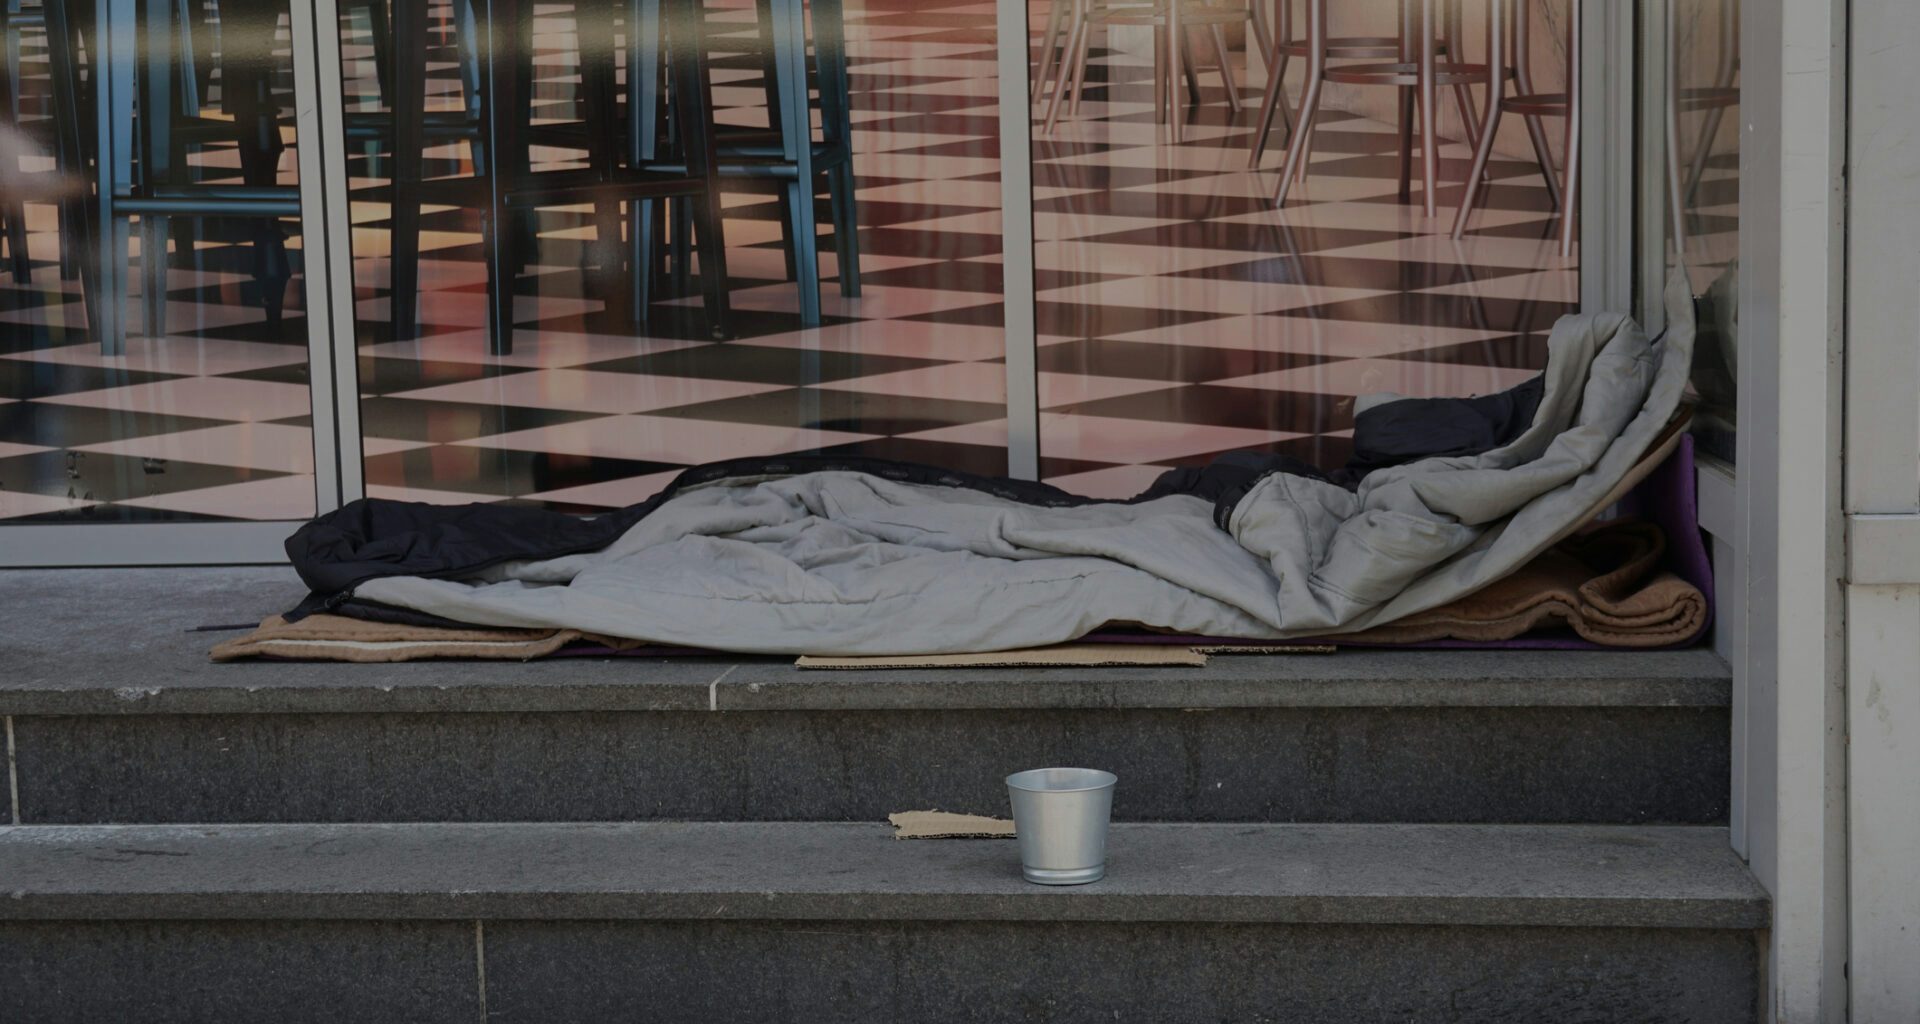 'It's like getting in a time machine': homeless agencies warn of rise in rough sleeping 3